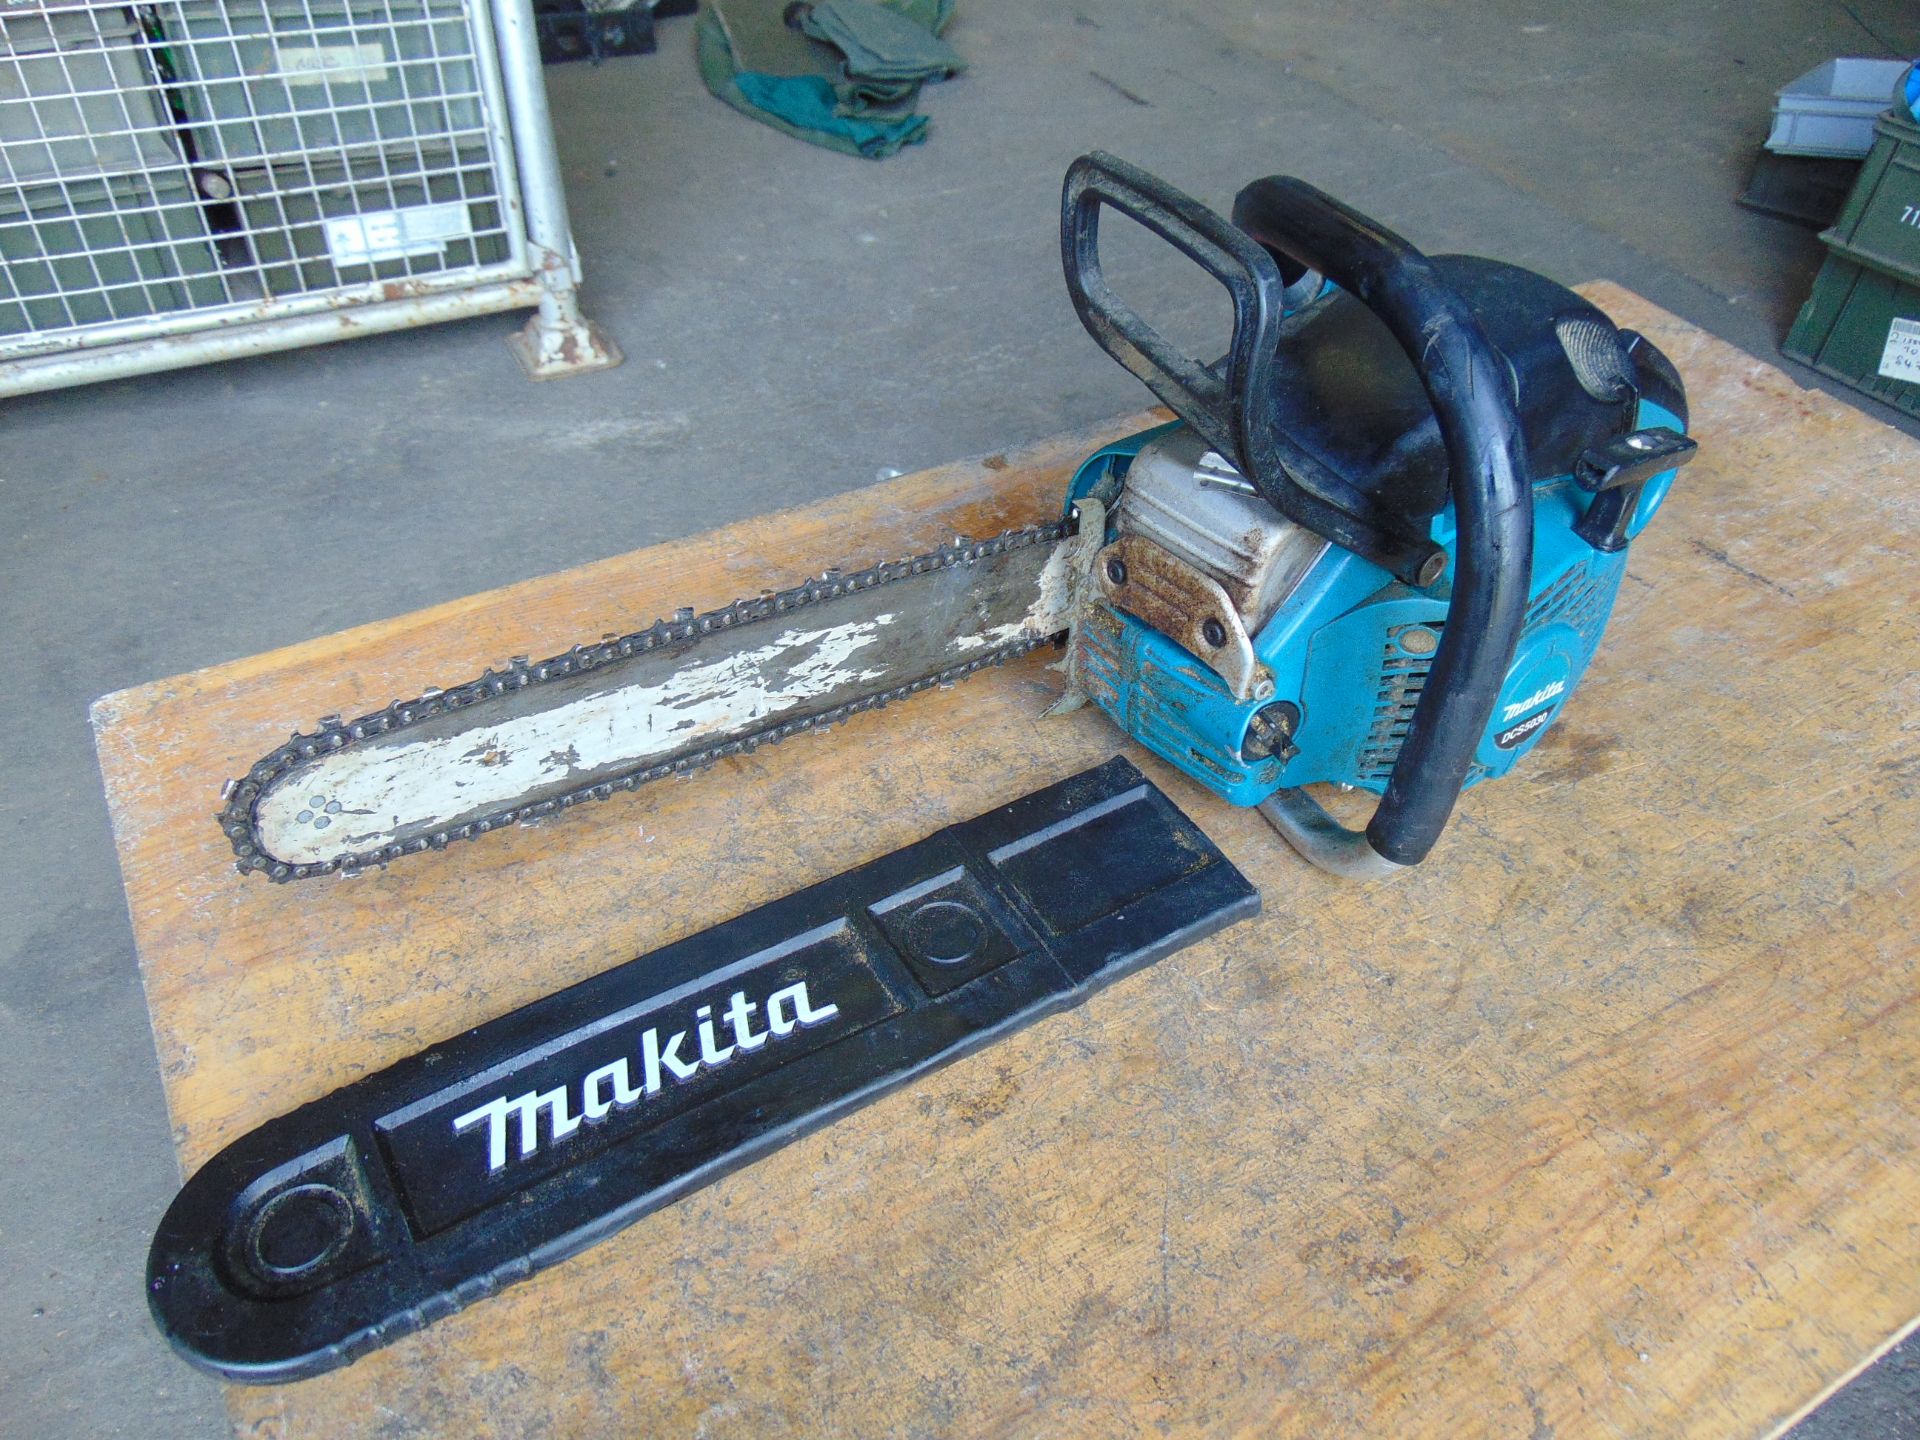 MAKITA DCS 5030 50CC Chainsaw c/w Chain Guard from MoD. - Image 3 of 6